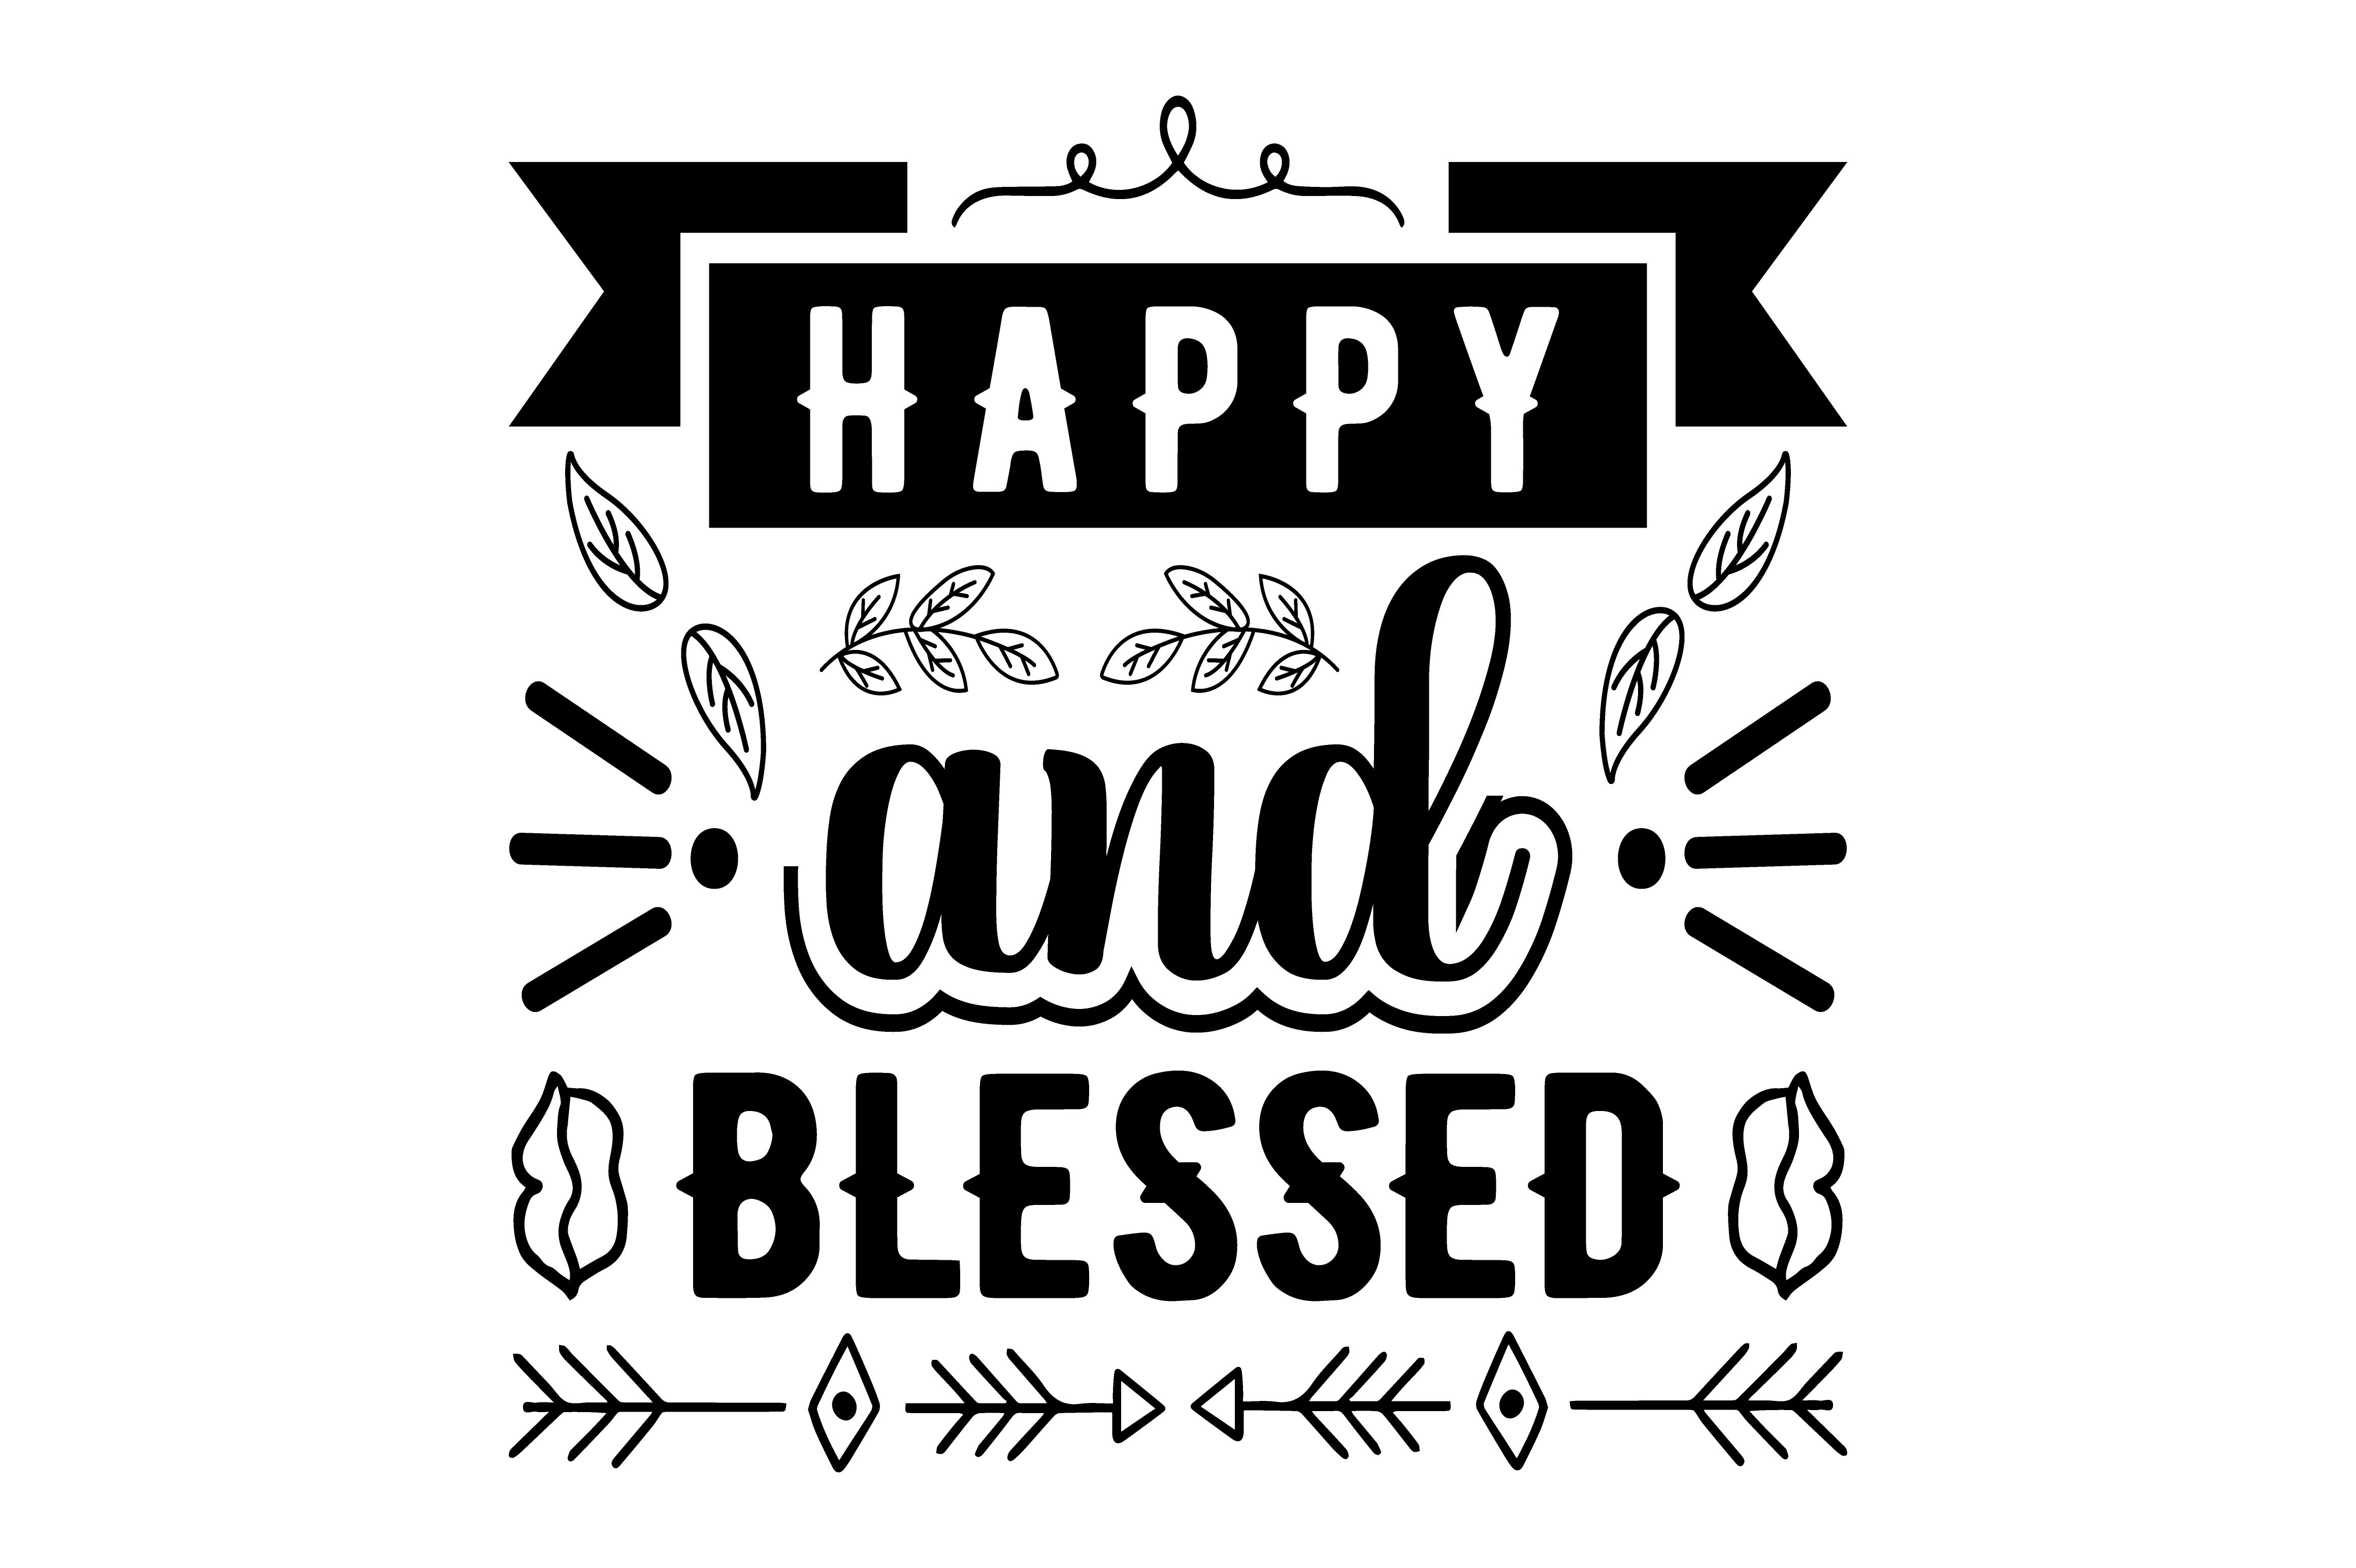 Happy and Blessed Graphic by Fairymahi66 · Creative Fabrica